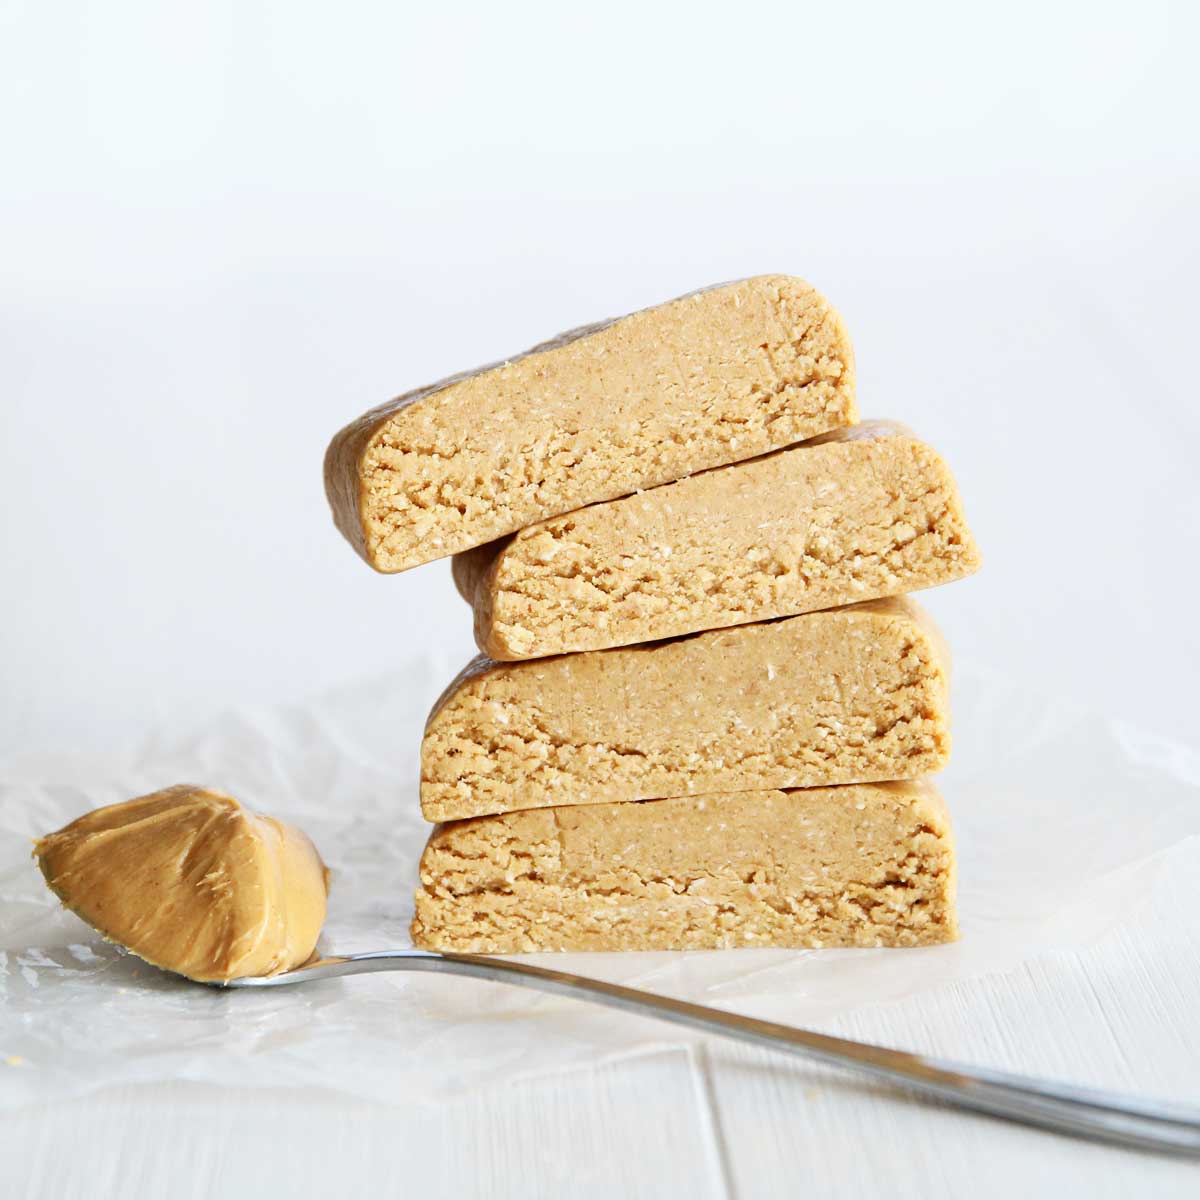 4-Ingredient Peanut Butter Oatmeal Protein Bars (Healthy, GF and Vegan) - Peanut Butter Glaze